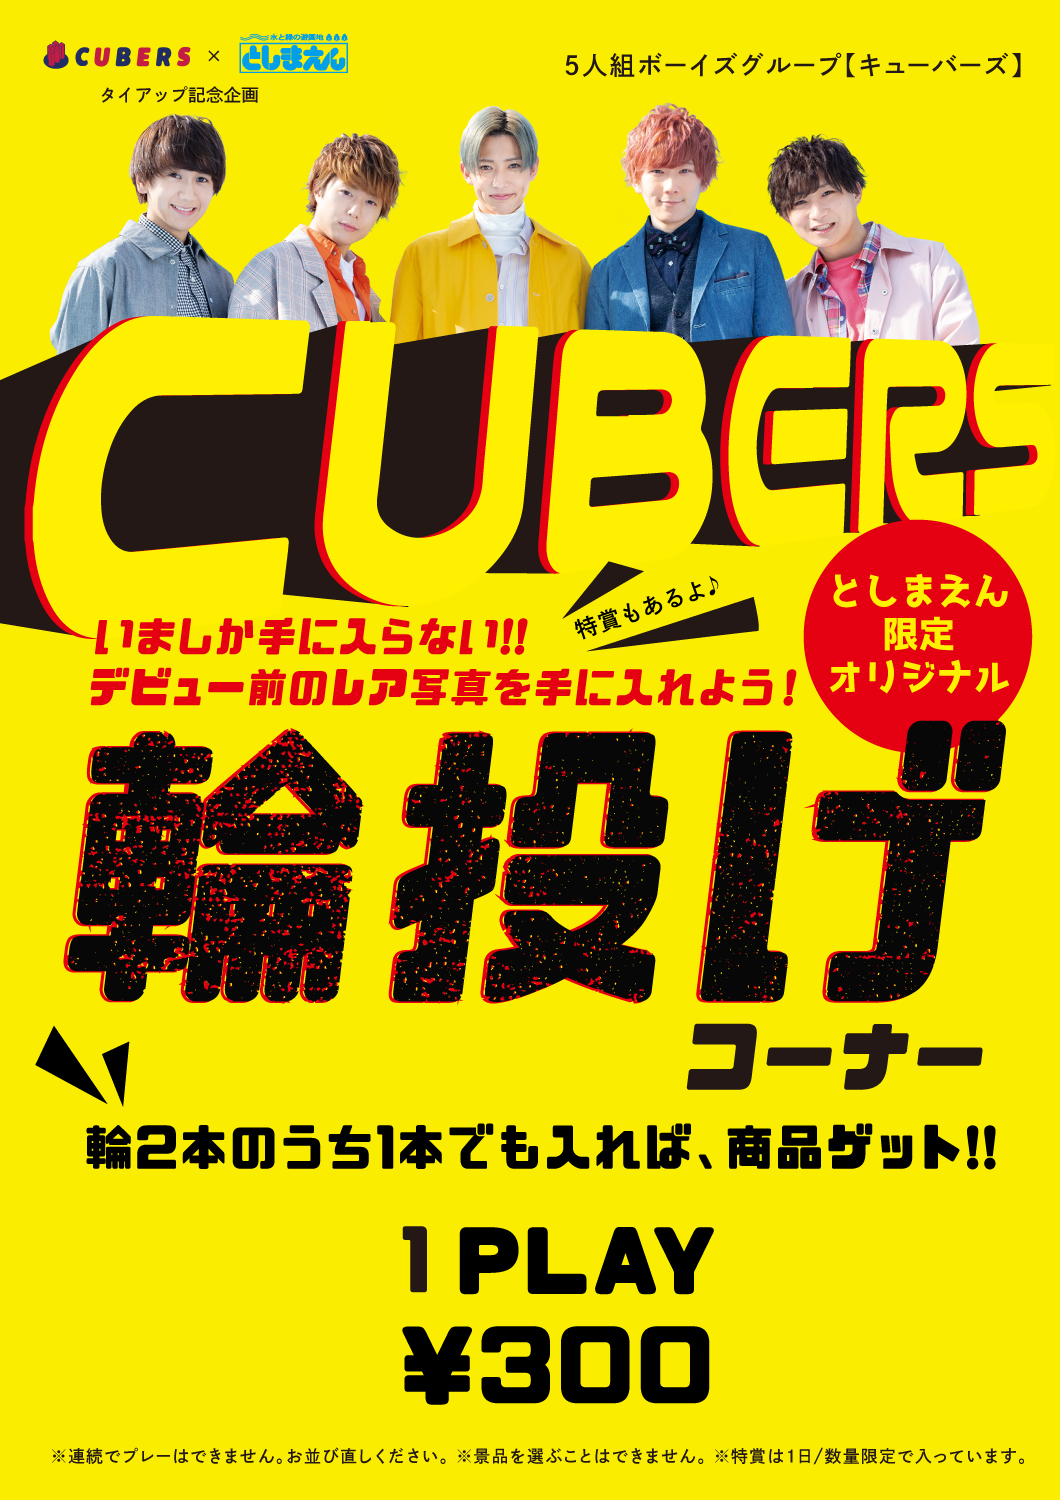 News 3 21 3 30 としまえんで Cubers輪投げゲーム 実施 Cubers Official Website